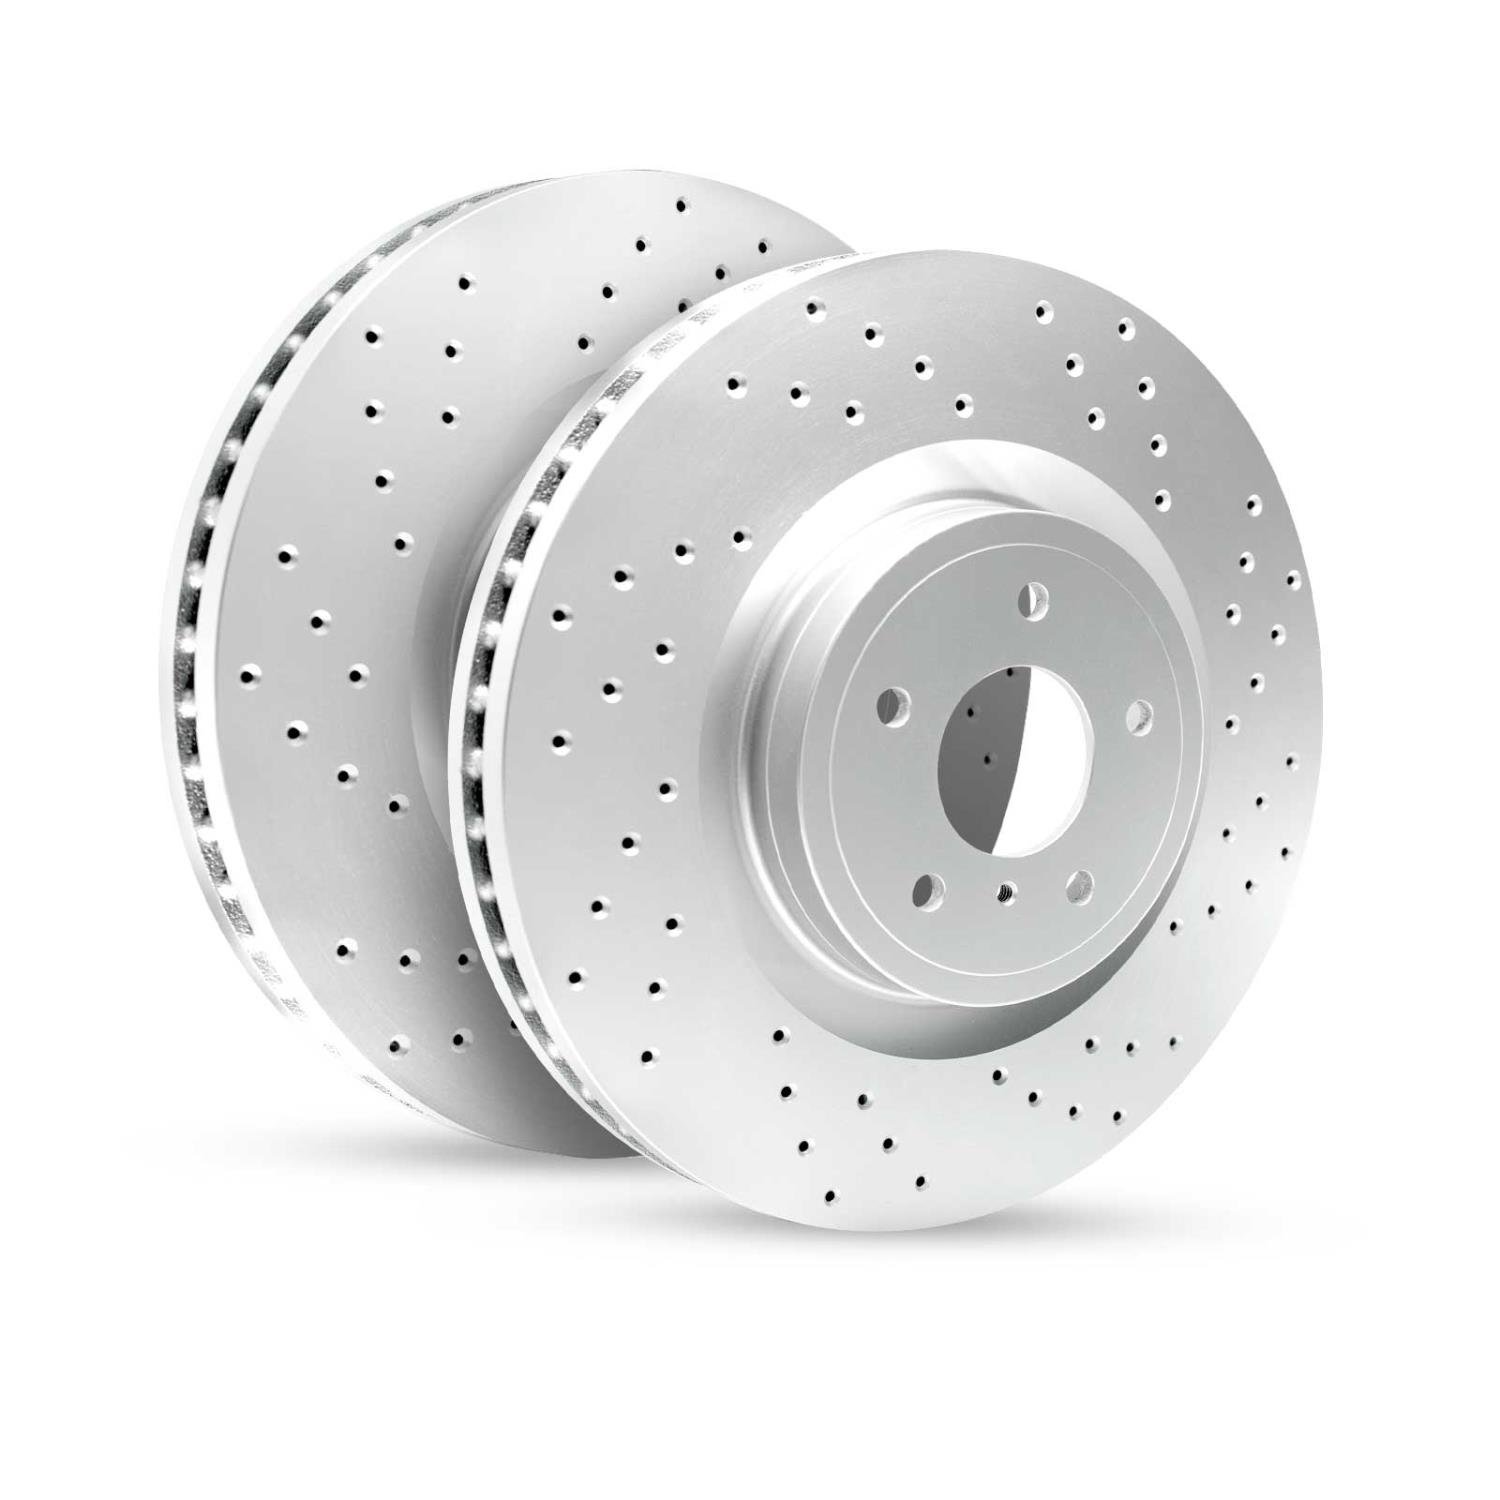 GEO-Carbon Drilled/Slotted Rotors, 2009-2014 Acura/Honda, Position: Rear